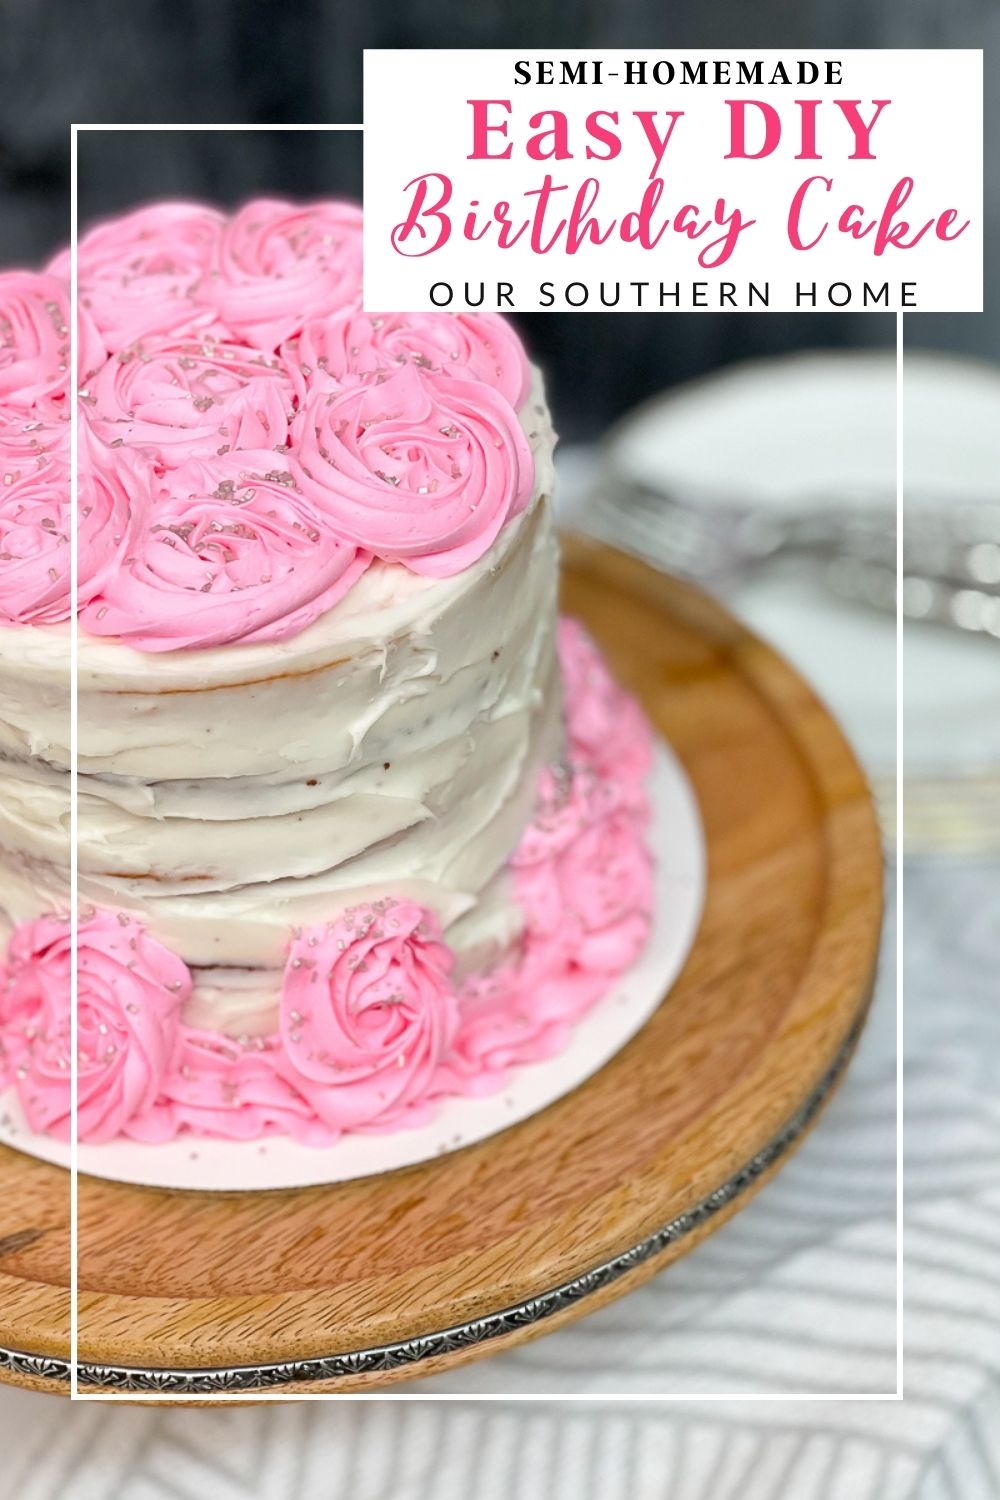 How to decorate cakes: 5 quick and easy do-it-yourself ideas